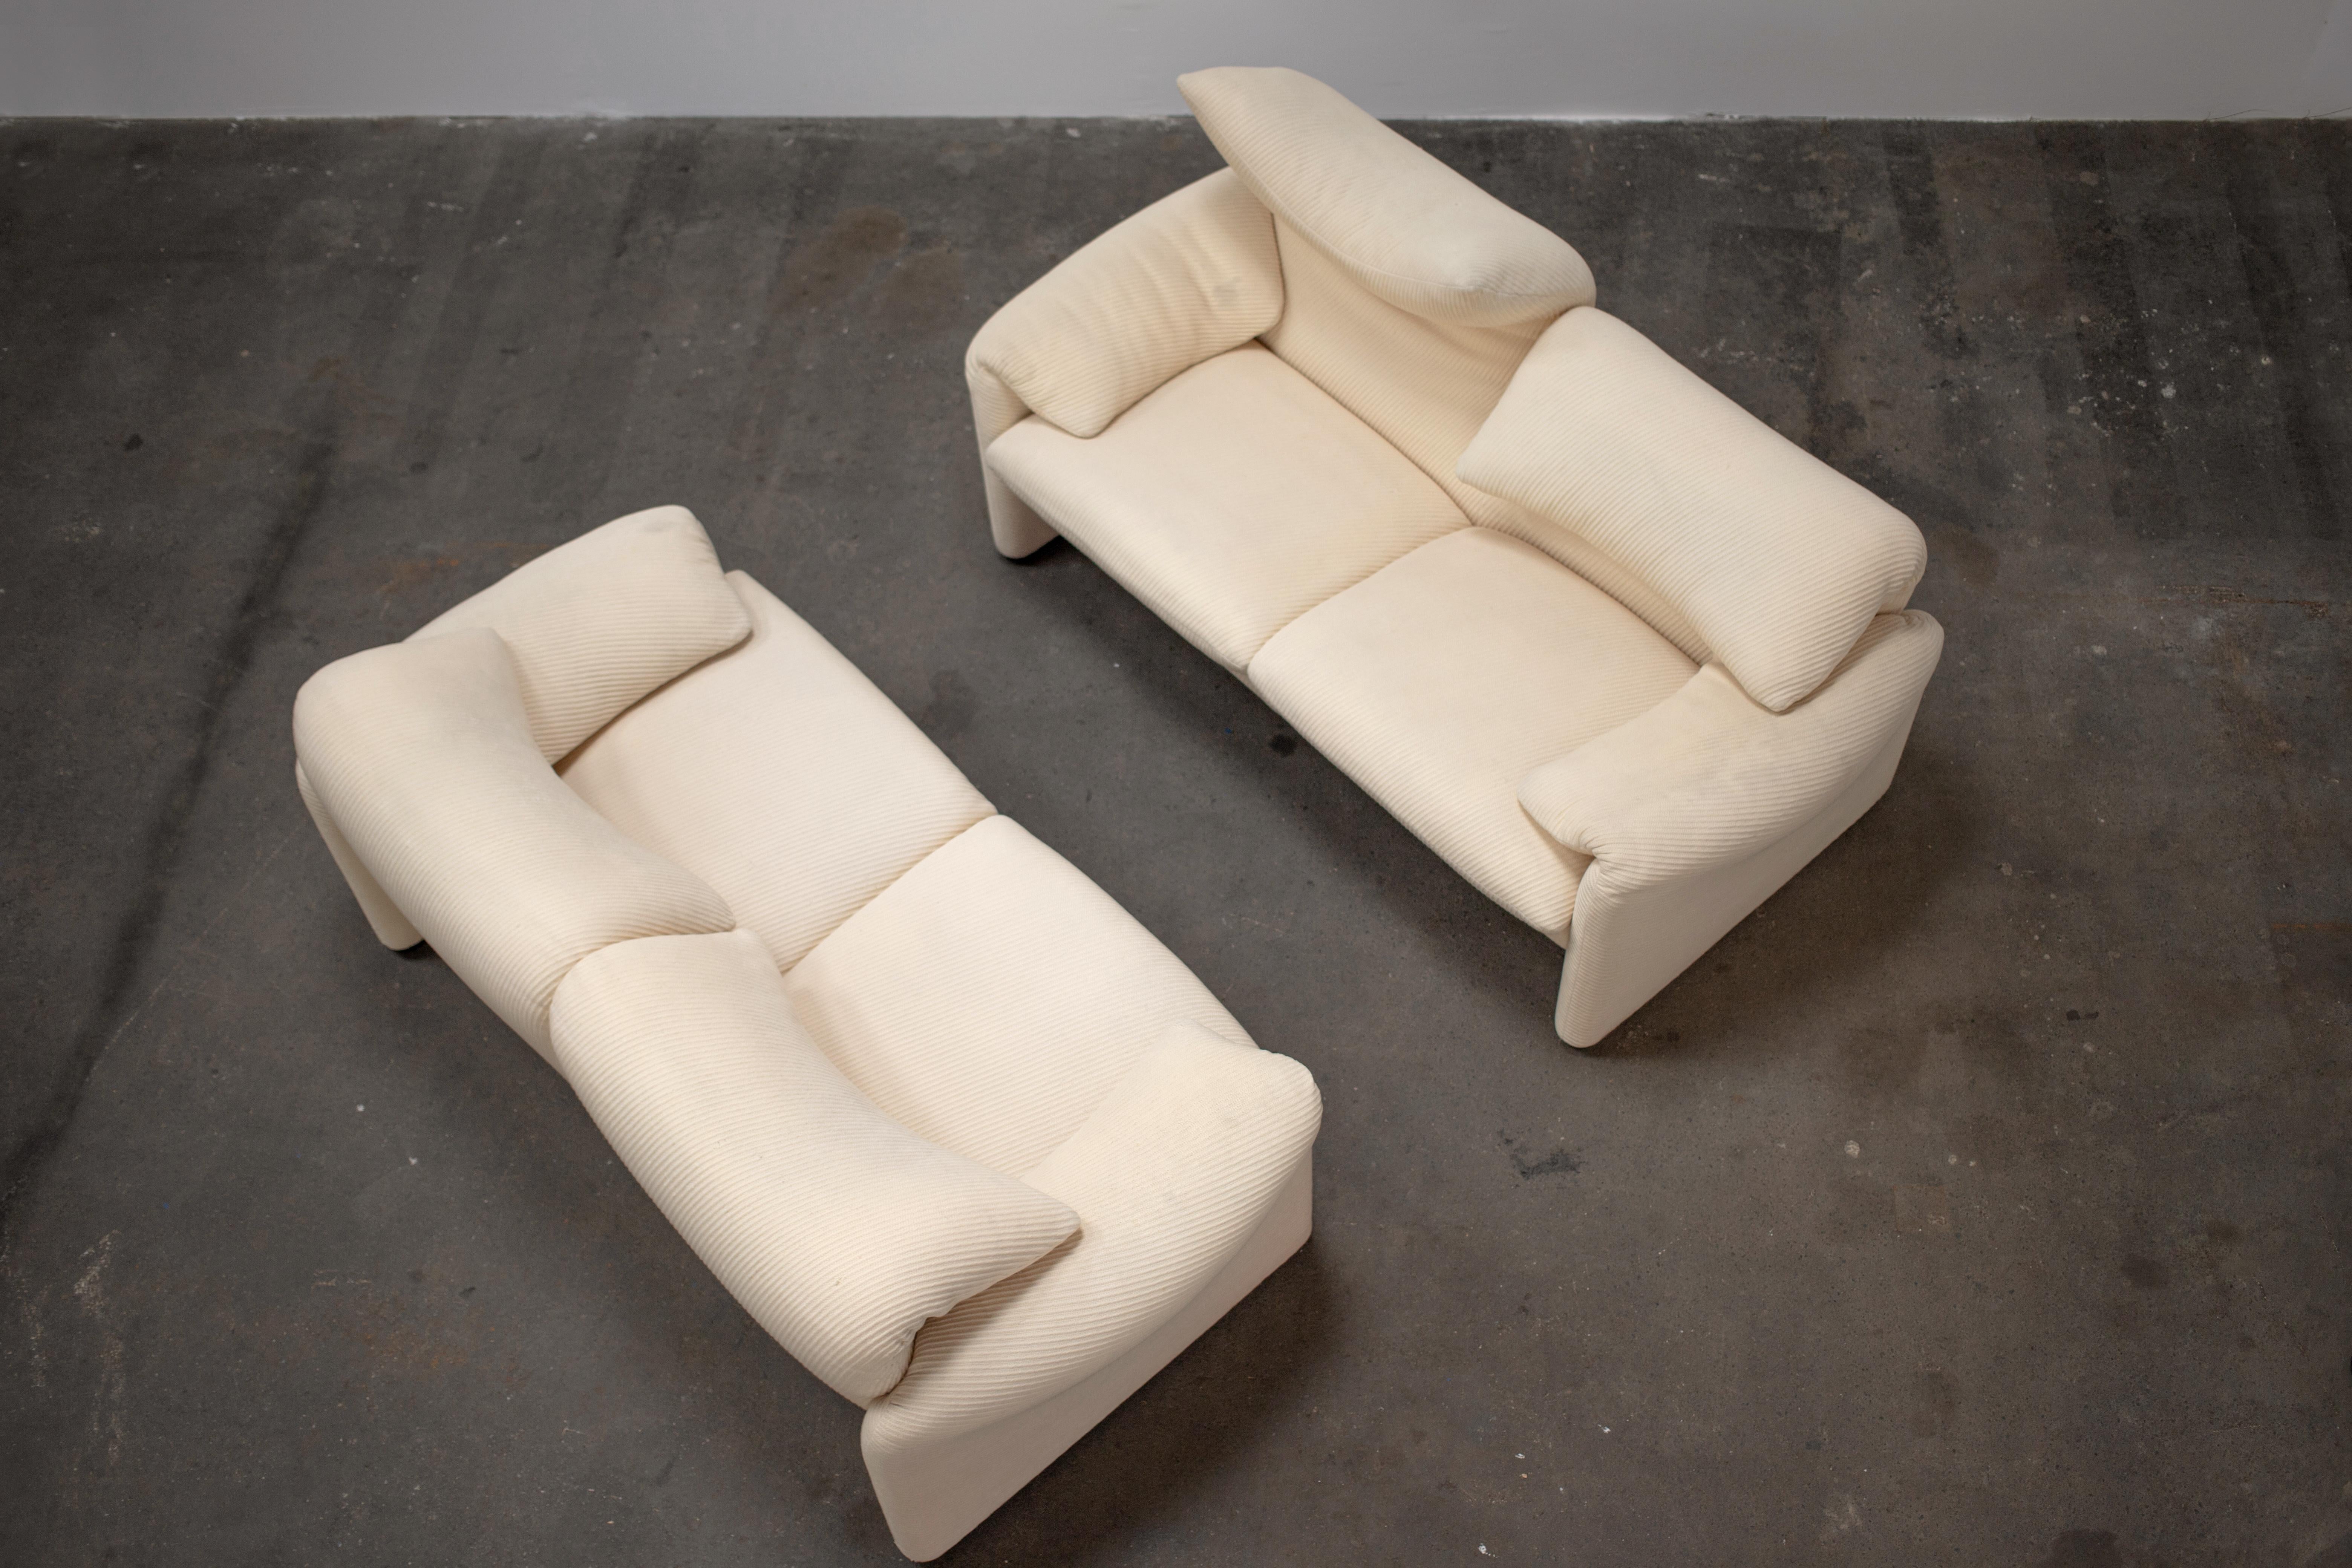 Organic Modern 1970s Pair of 2-Seater Maralunga Sofas by Vico Magistretti for Cassina